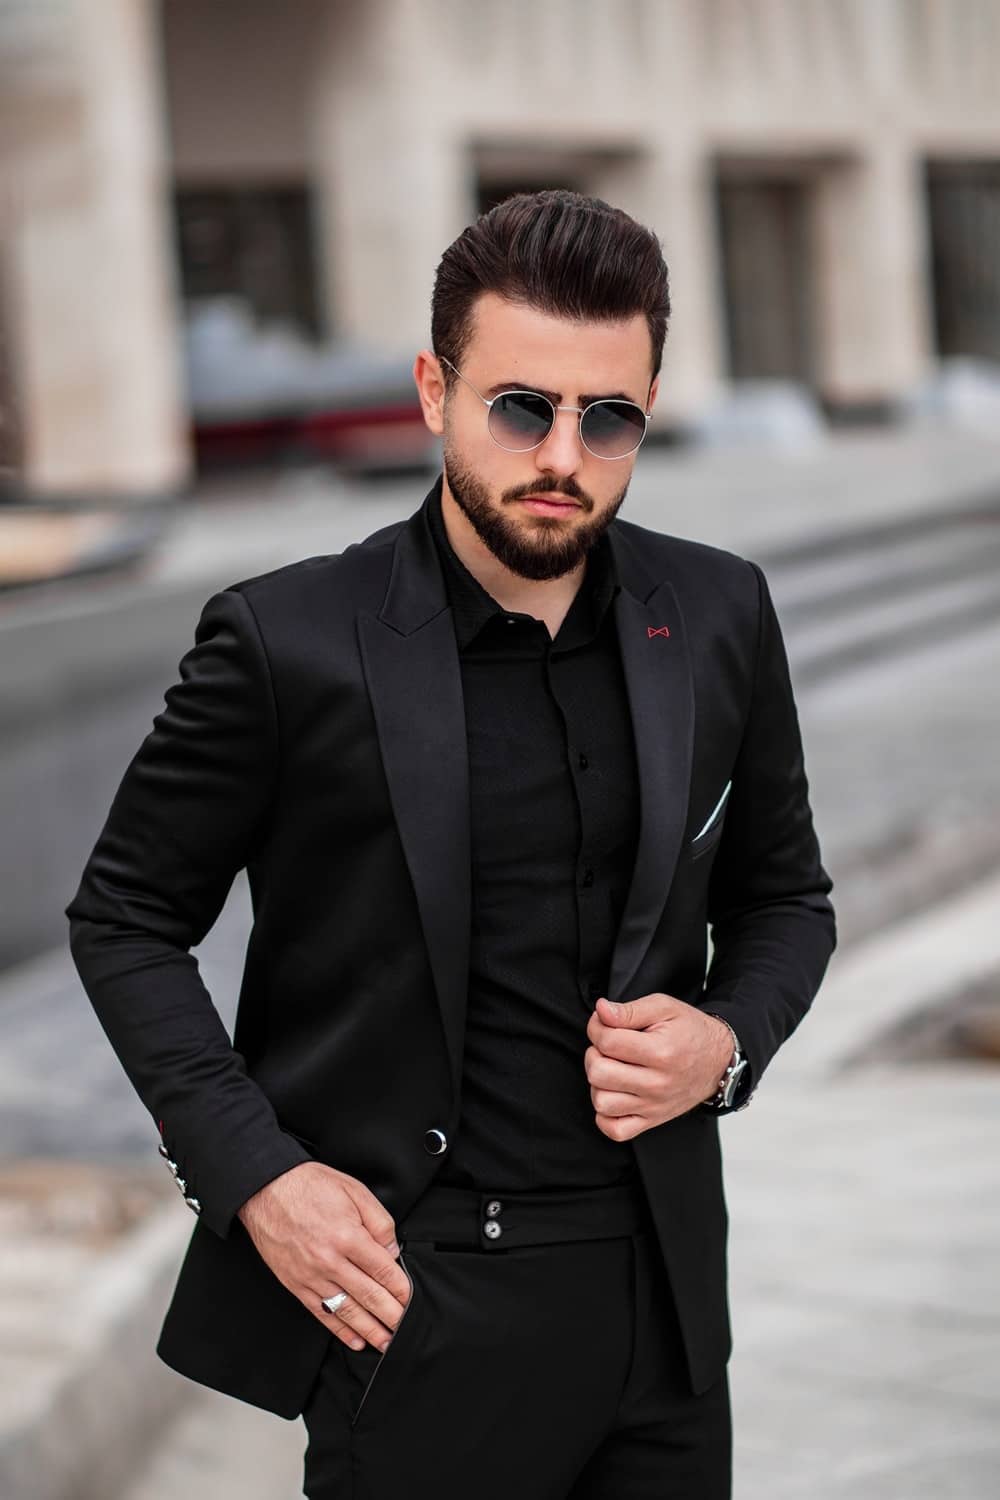 2023 Outfit Trends for Men 20 Styling Tips from Experts